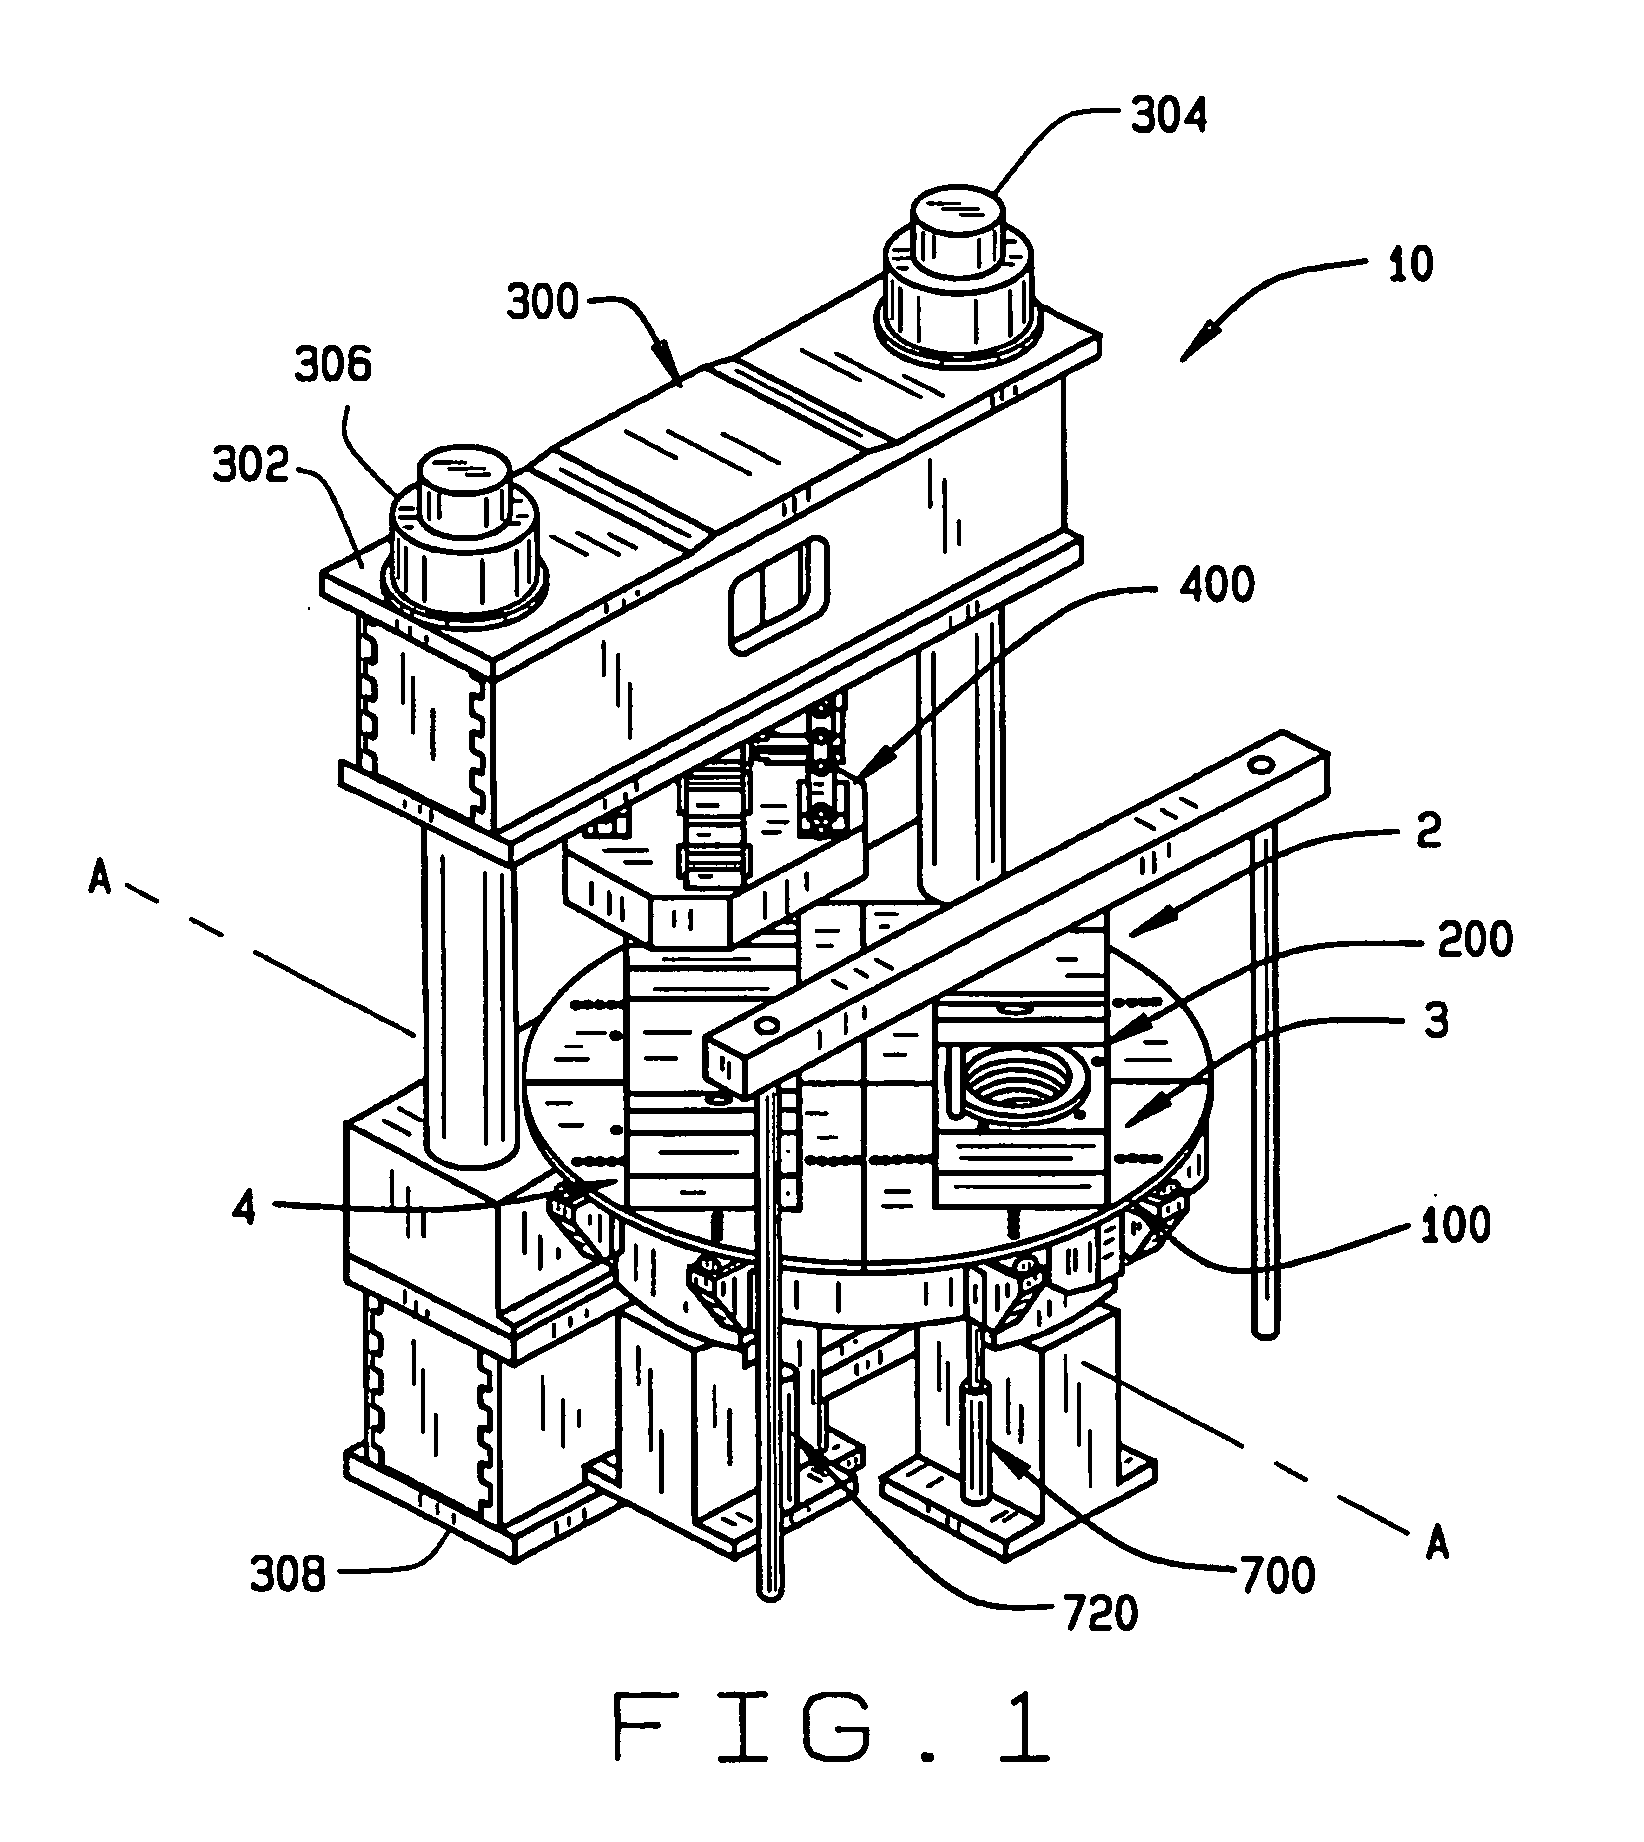 Apparatus and method for simultaneous usage of multiple die casting tools